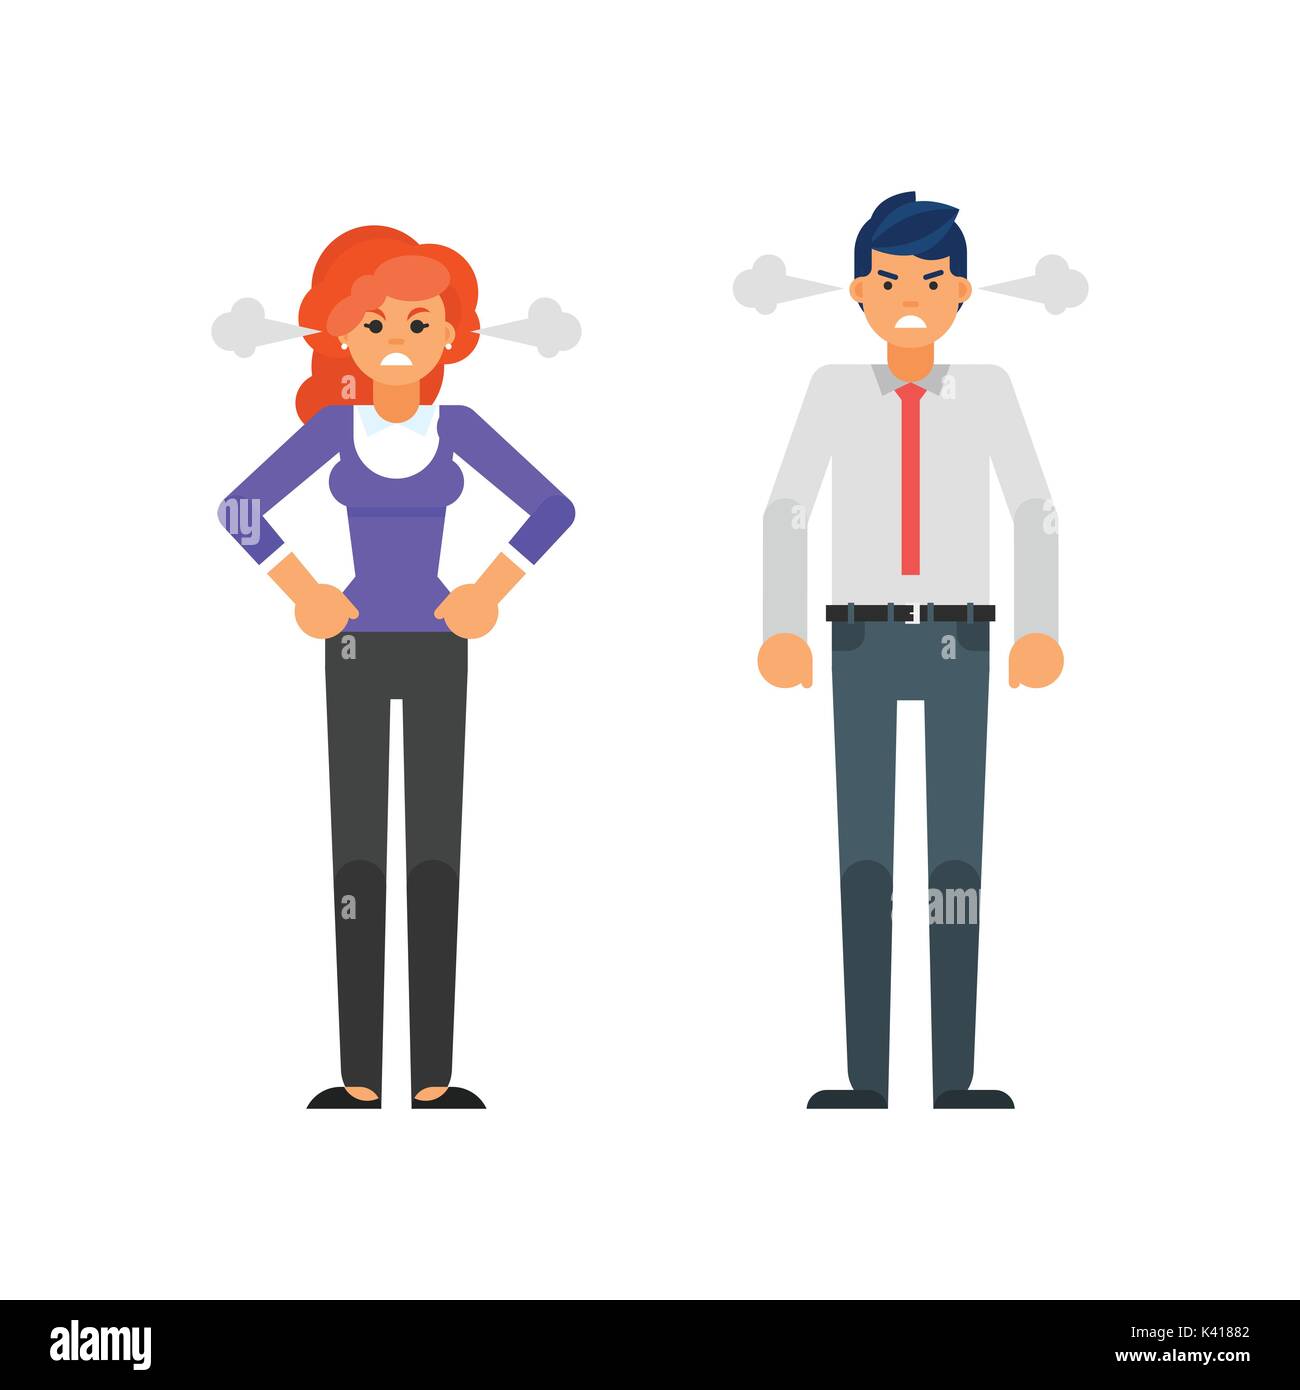 Vector flat style illustration of angry businessman and businesswoman characters with a steam coming out from their ears. Isolated on white background Stock Vector